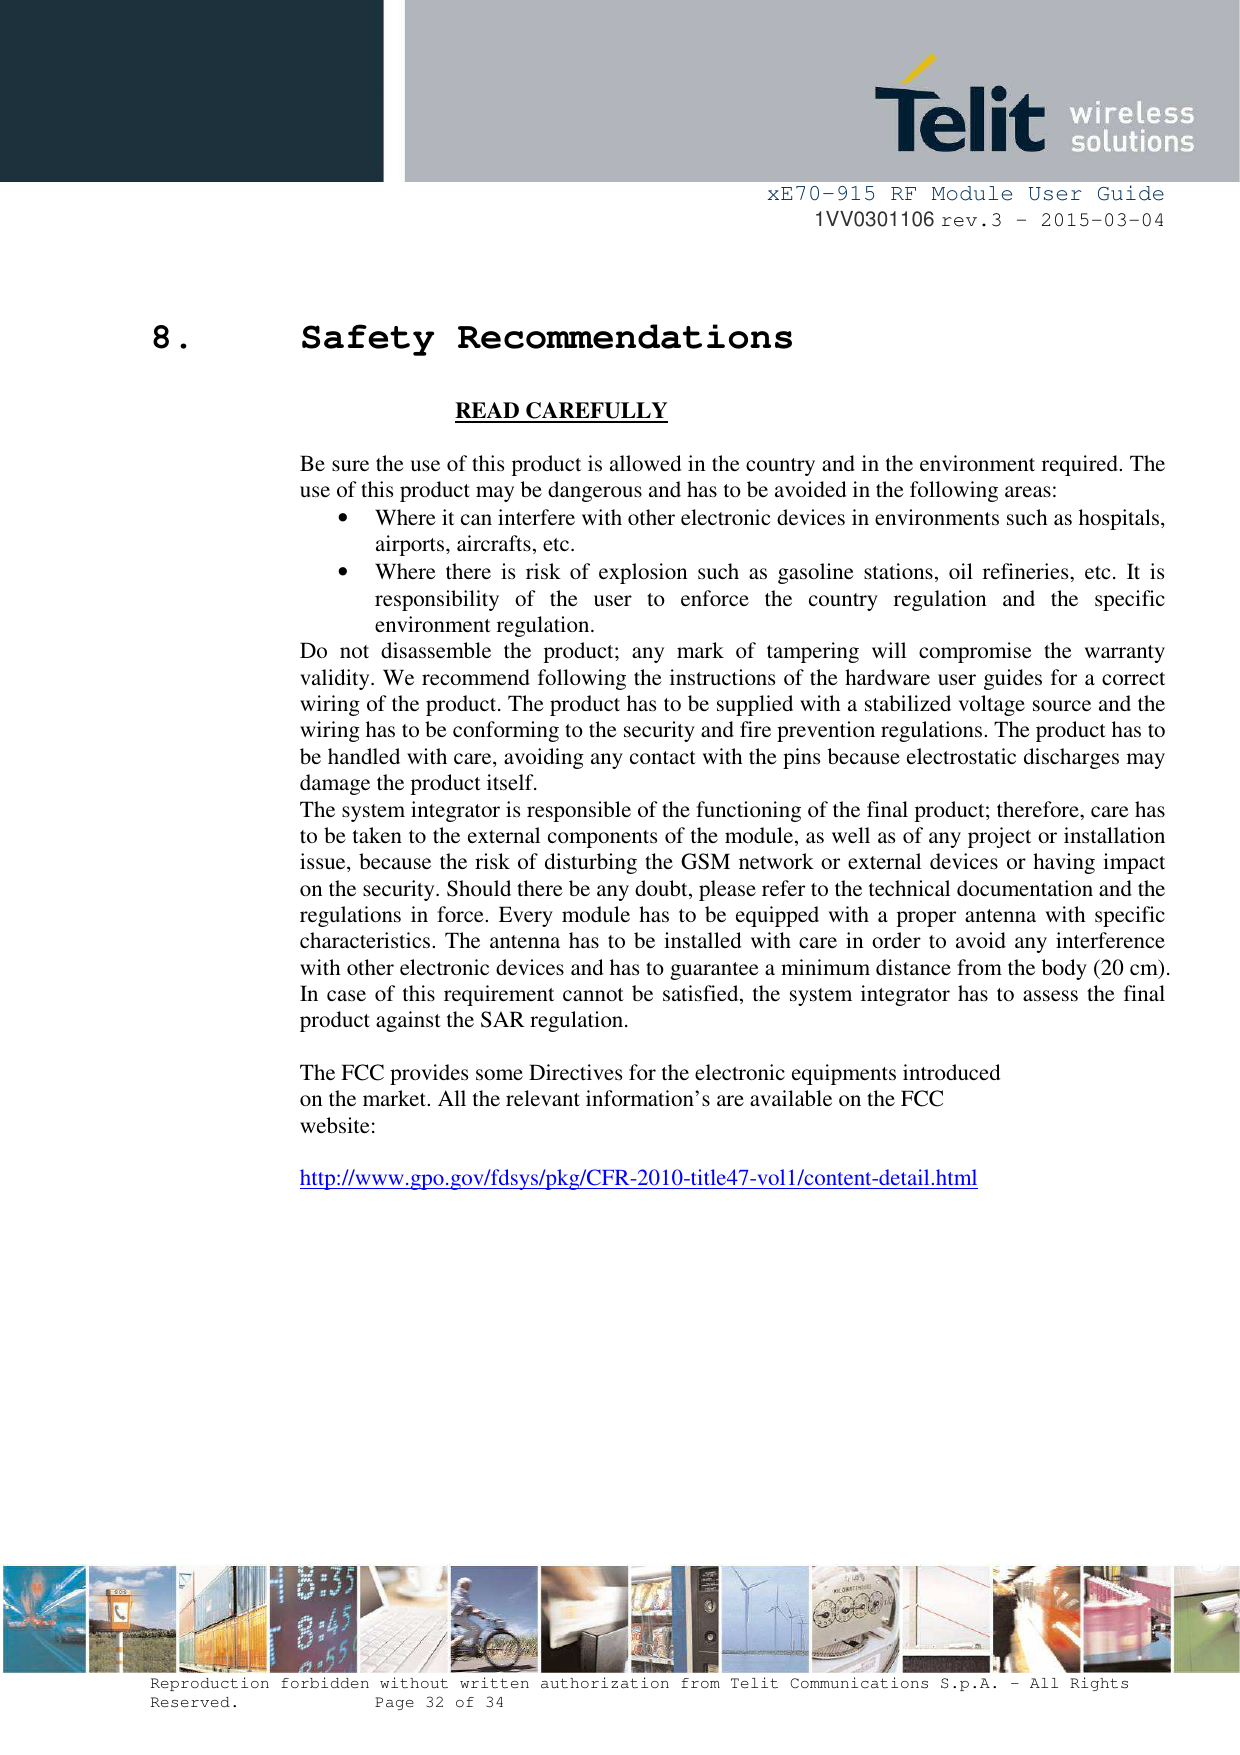 xE70-915 RF Module User Guide 1VV0301106 rev.3 – 2015-03-04 Reproduction forbidden without written authorization from Telit Communications S.p.A. - All Rights Reserved.    Page 32 of 34 8.Safety Recommendations READ CAREFULLY Be sure the use of this product is allowed in the country and in the environment required. The use of this product may be dangerous and has to be avoided in the following areas: •Where it can interfere with other electronic devices in environments such as hospitals,airports, aircrafts, etc. •Where  there  is  risk  of  explosion  such  as  gasoline  stations,  oil  refineries,  etc.  It  isresponsibility  of  the  user  to  enforce  the  country  regulation  and  the  specific environment regulation. Do  not  disassemble  the  product;  any  mark  of  tampering  will  compromise  the  warranty validity. We recommend following the instructions of the hardware user guides for a correct wiring of the product. The product has to be supplied with a stabilized voltage source and the wiring has to be conforming to the security and fire prevention regulations. The product has to be handled with care, avoiding any contact with the pins because electrostatic discharges may damage the product itself. The system integrator is responsible of the functioning of the final product; therefore, care has to be taken to the external components of the module, as well as of any project or installation issue, because the risk of disturbing the GSM network or external devices or having impact on the security. Should there be any doubt, please refer to the technical documentation and the regulations in force. Every module has to be equipped with a proper antenna with specific characteristics. The antenna has to be installed with care in order to avoid any interference with other electronic devices and has to guarantee a minimum distance from the body (20 cm). In case of this requirement cannot be satisfied, the system integrator has to assess the final product against the SAR regulation. The FCC provides some Directives for the electronic equipments introduced on the market. All the relevant information’s are available on the FCC  website: http://www.gpo.gov/fdsys/pkg/CFR-2010-title47-vol1/content-detail.html 